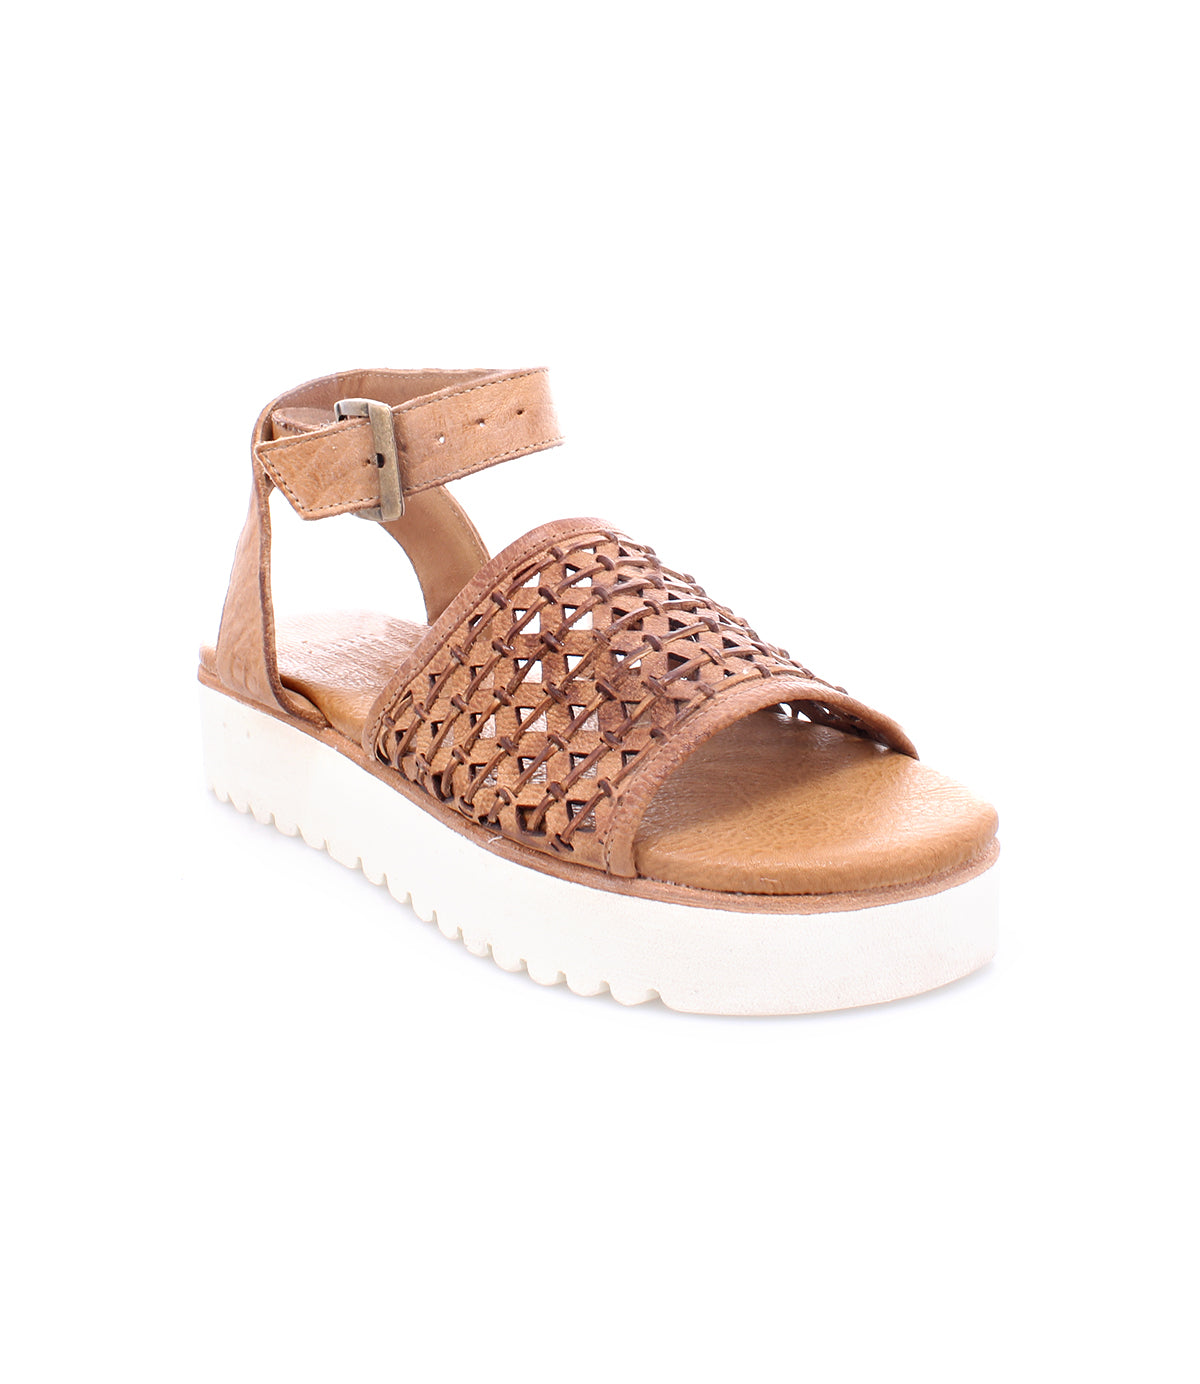 A Bed Stu Brisa women's sandal with woven straps and a white sole.